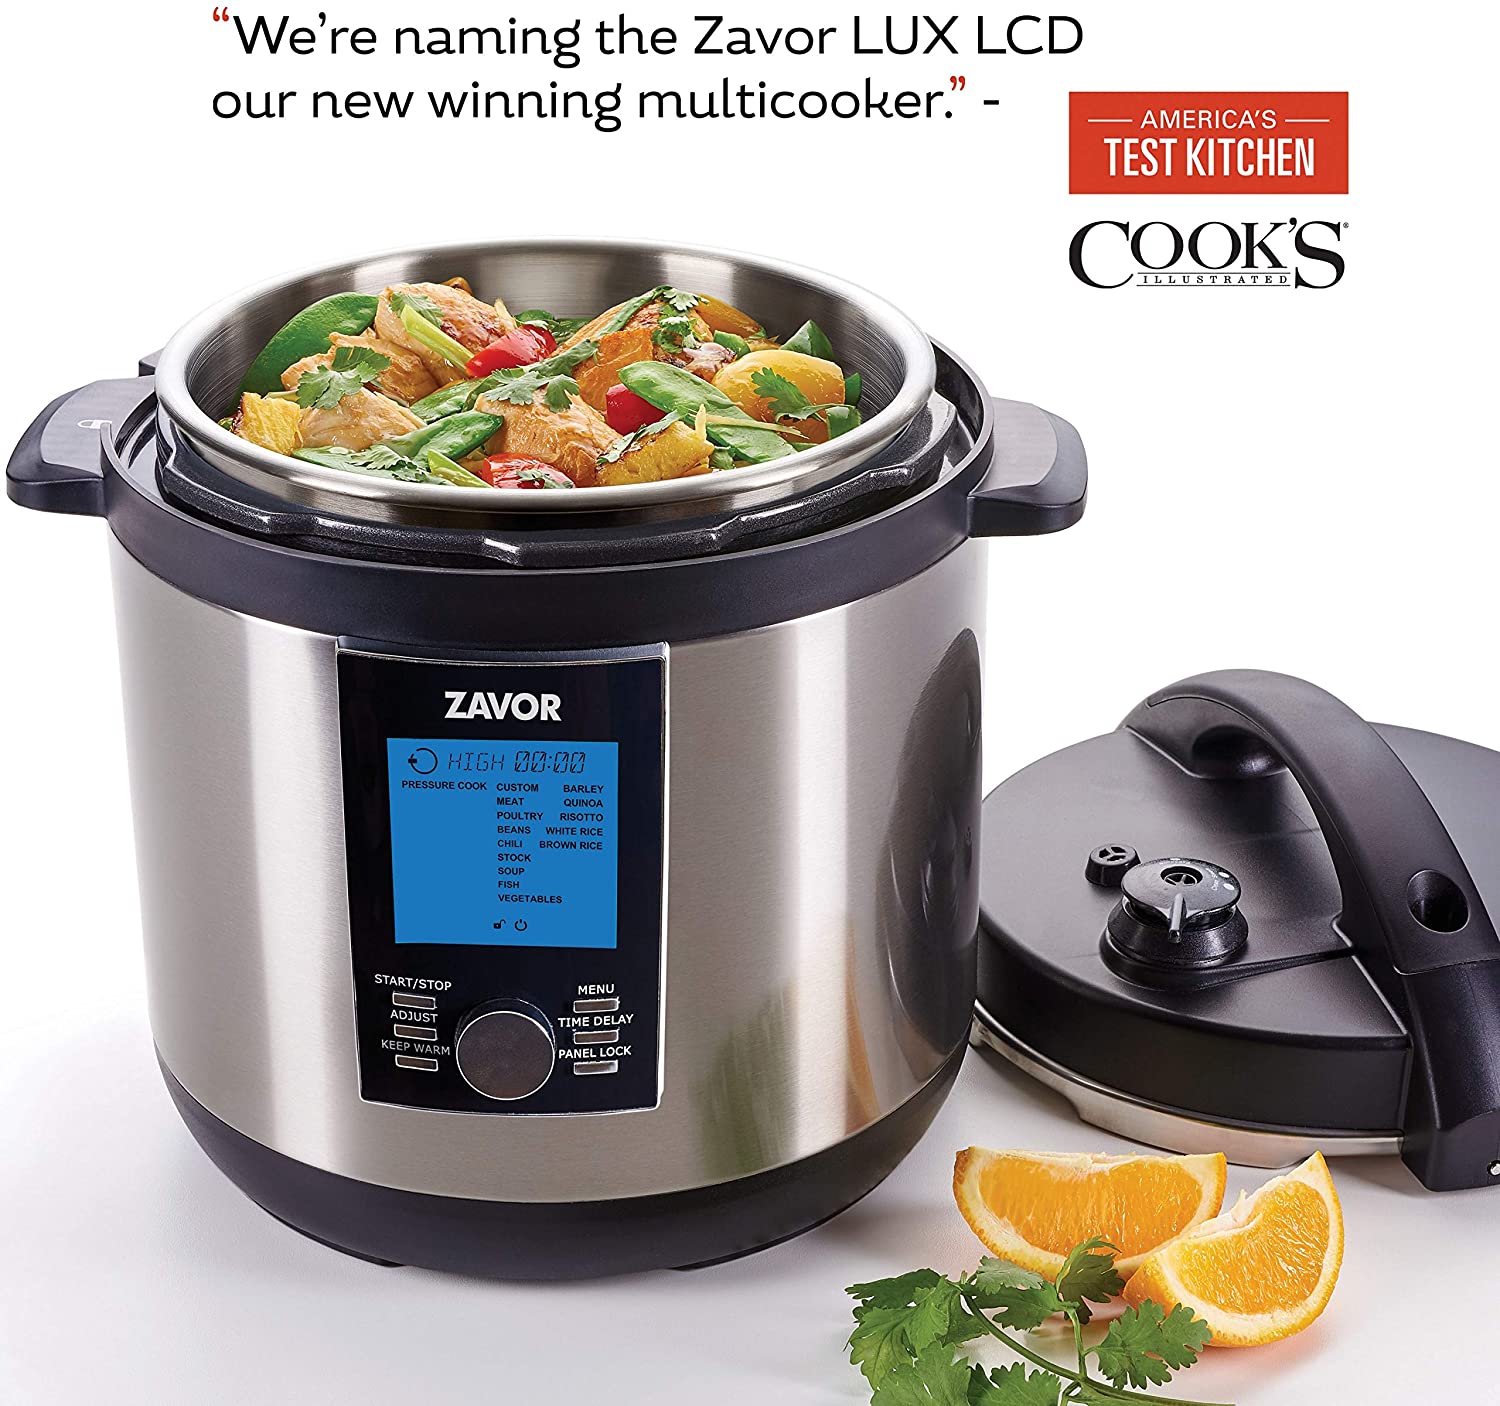 Zavor LUX LCD 8 Quart Programmable Electric Multi-Cooker: Pressure Cooker,  Slow Cooker, Rice Cooker, Yogurt Maker, Steamer and More - Stainless Steel 